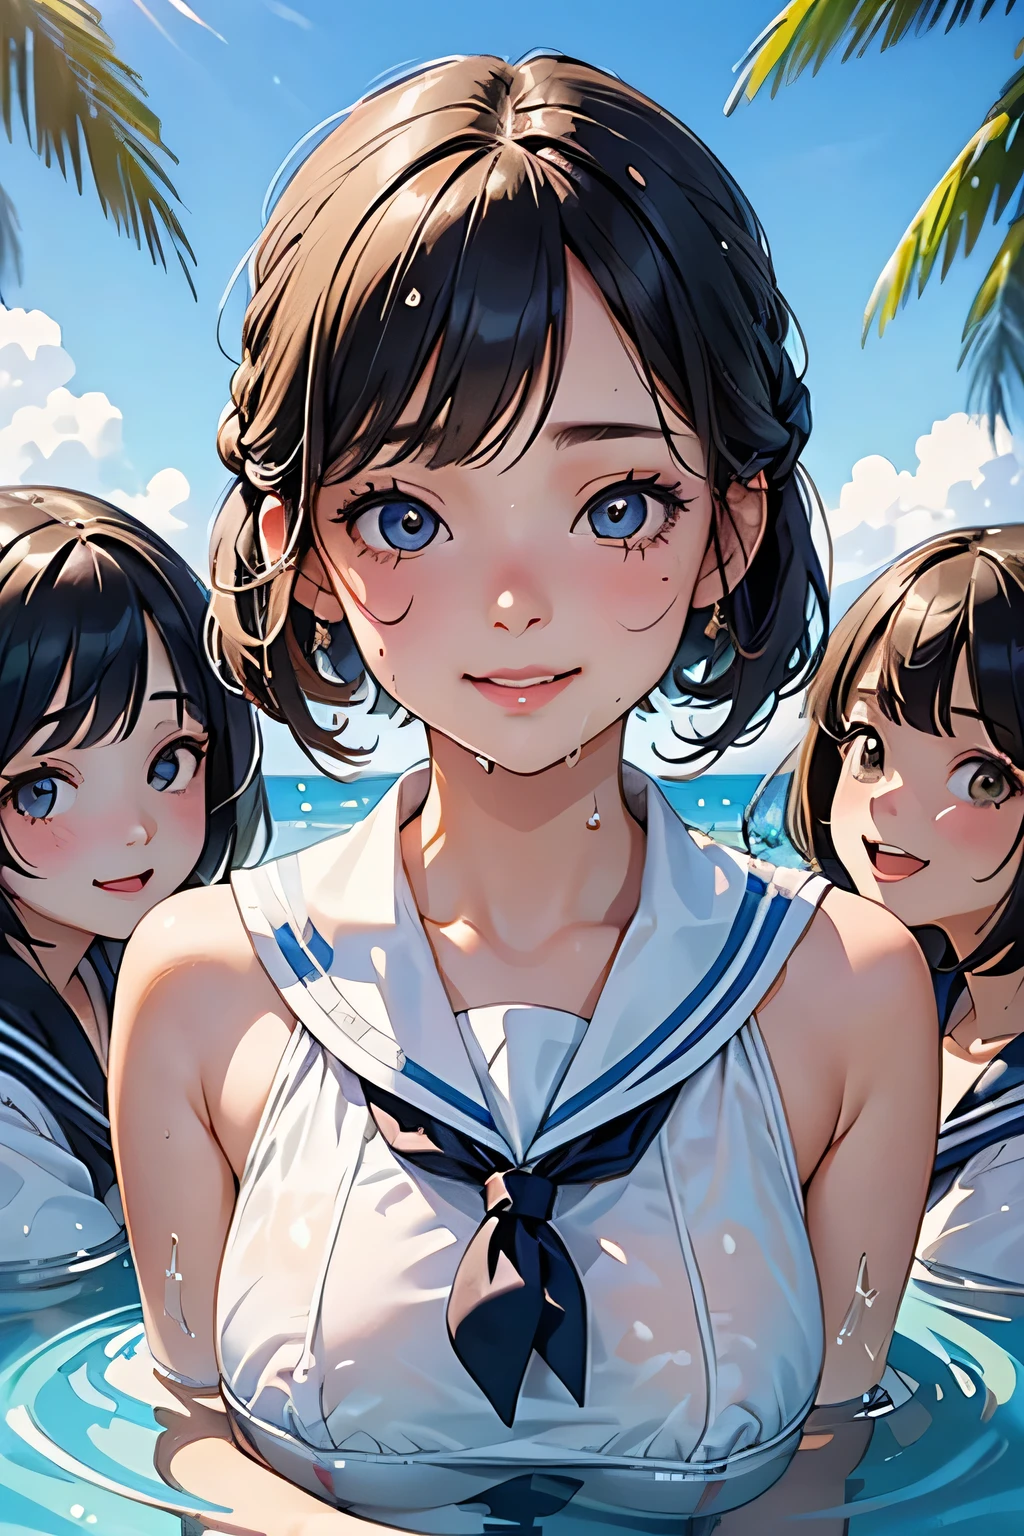 highest quality、High resolution、Detailed Background、Beautiful face in every detail、Anatomically correct、Detailed facial expressions、(Detailed eyes:1.2)、(Highly detailed face:1.4)、(Huge breasts:1.1)、cute hair color、Braided bob cut、Braided Ponytail、Teenage beauty、Sailor Bikini、Sailor School Swimsuit,(White sailor collar)、My whole body gets wet、Wet and see-through swimsuit、Water play spot、Water slide、Water play event、sexual expression、smile、cute hairstyle、In a joking manner、(Three girls having fun:1.5)、Smiling、Throwing water at each other、cute